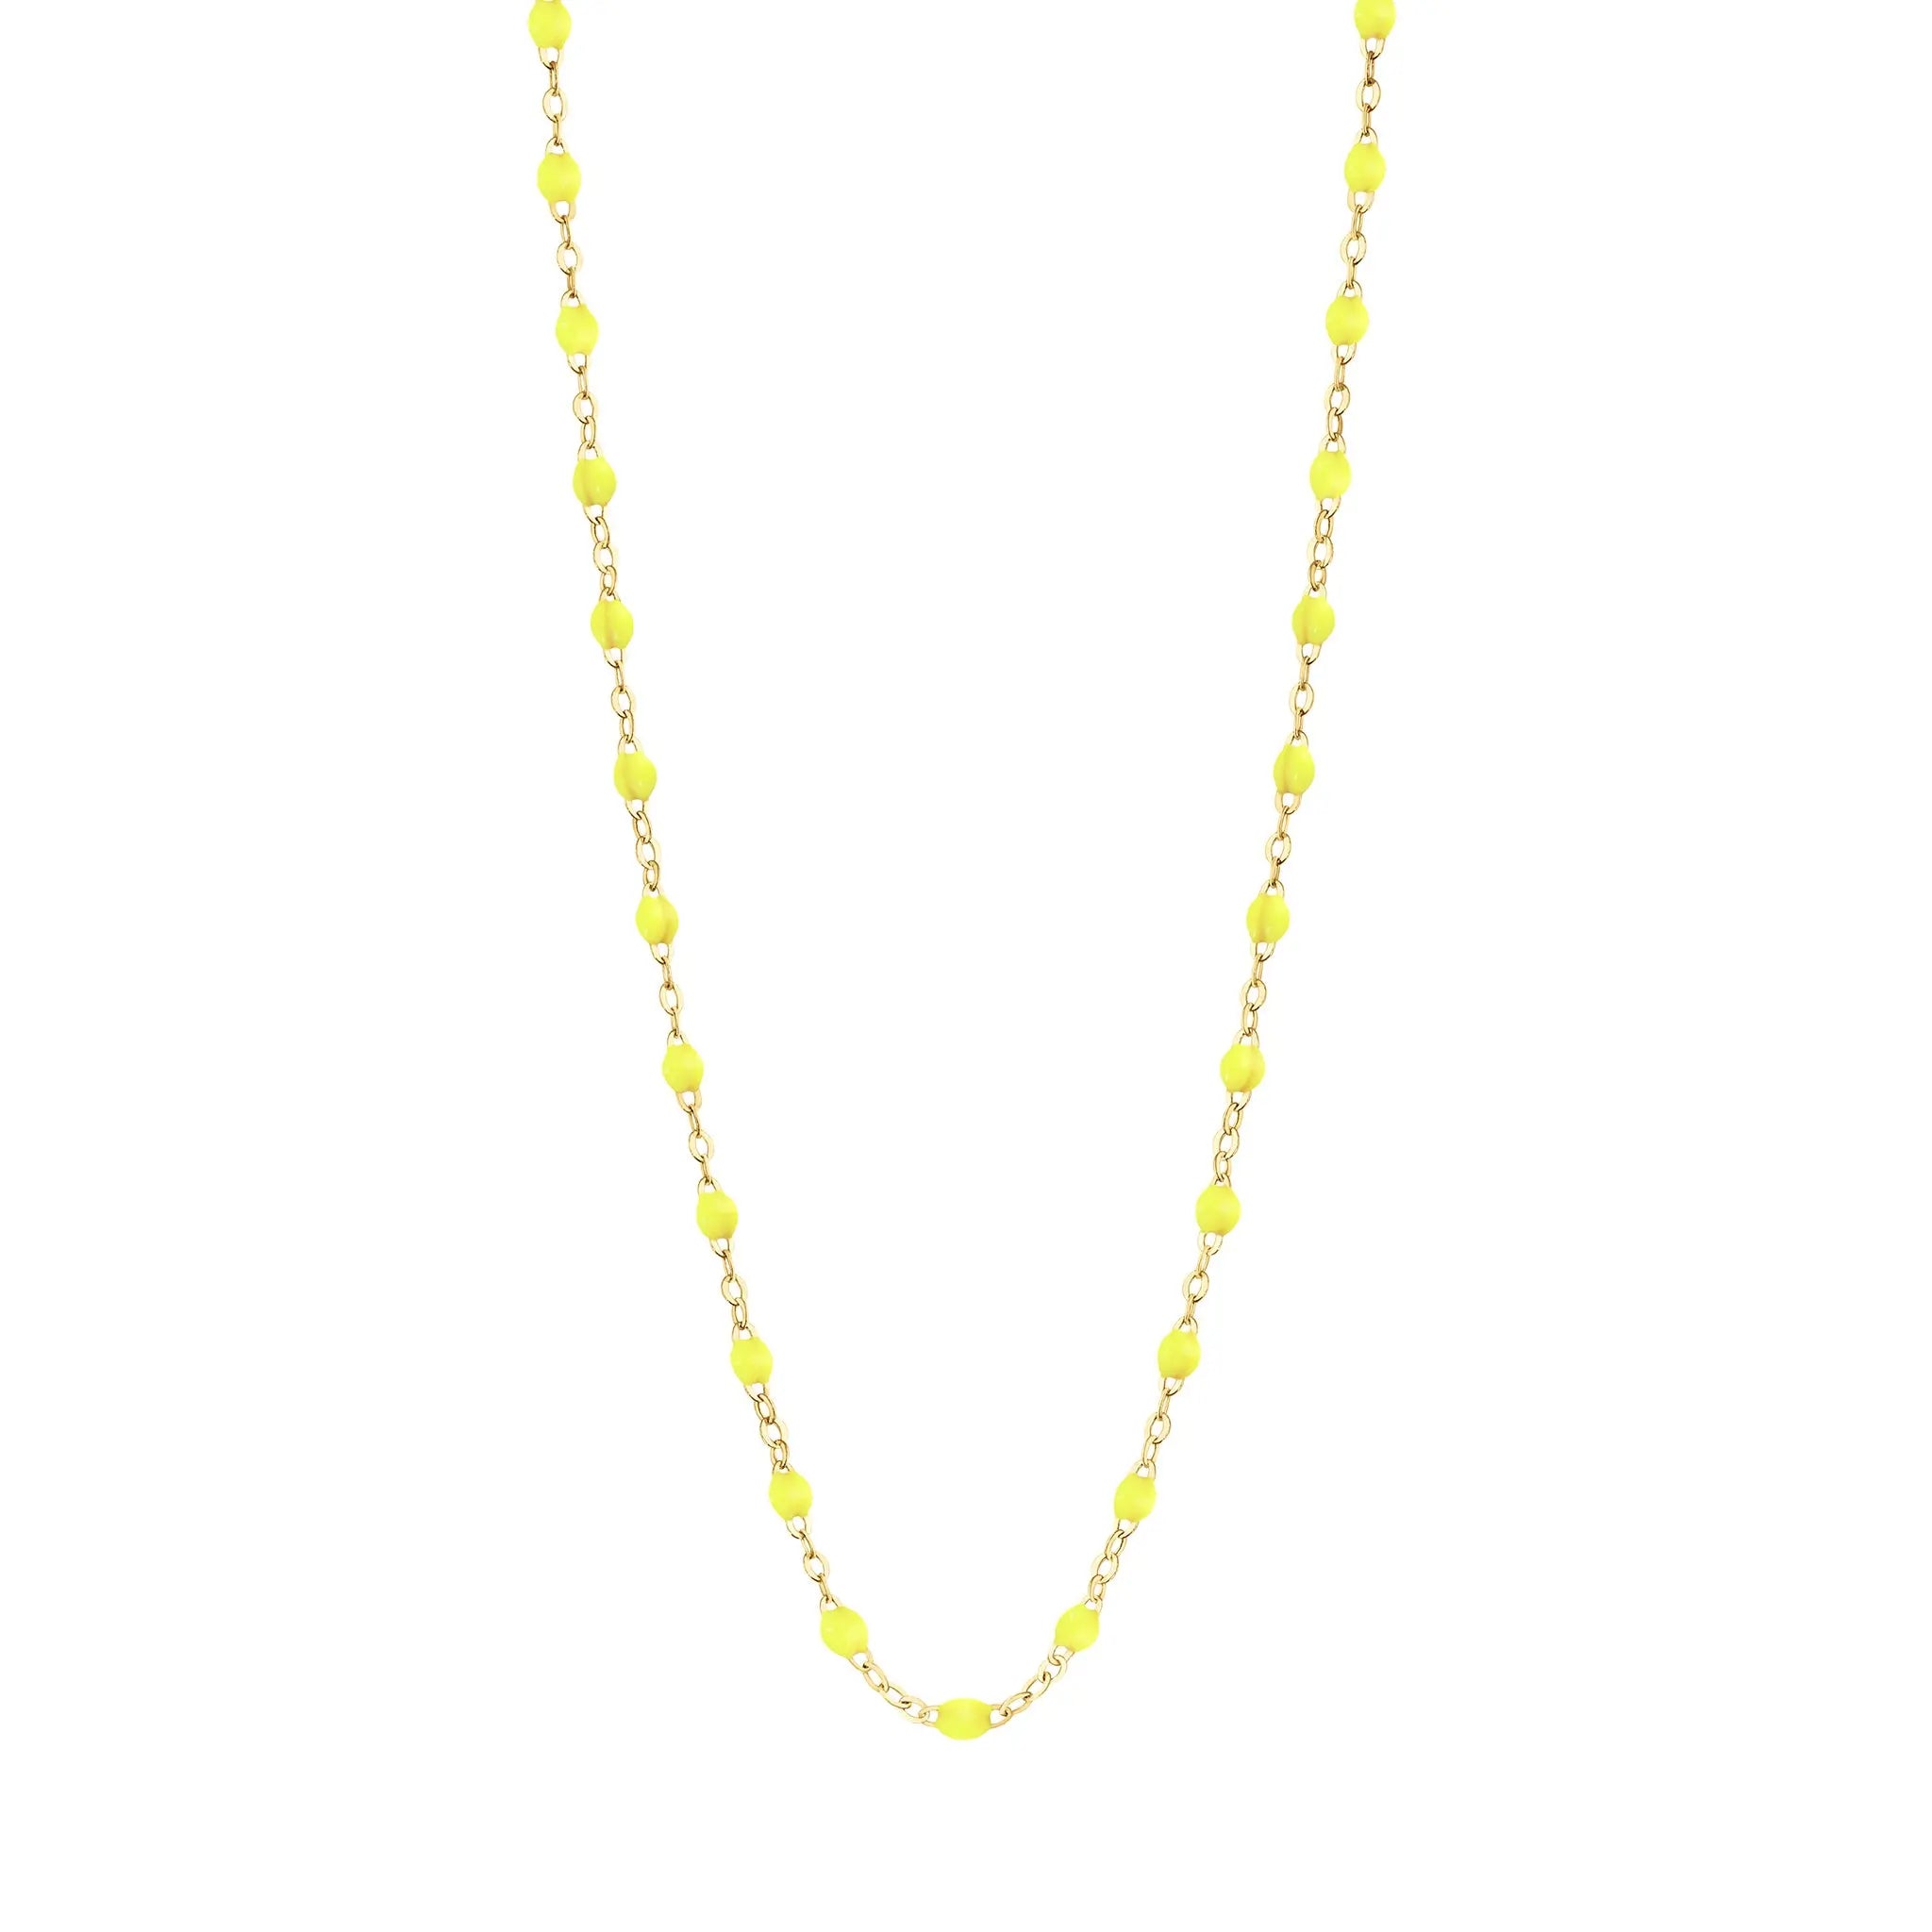 Stack you necklace layers with this versatile beaded chain! The Classic Gigi Necklace by gigi CLOZEAU features 18 carat yellow gold, and striking Lime resin jewels for an everyday effortless appearance. Handcrafted in 18k yellow gold. The beads measure 1.50mm in diameter and is finished with a spring ring clasp. The length is 16.5 inches.